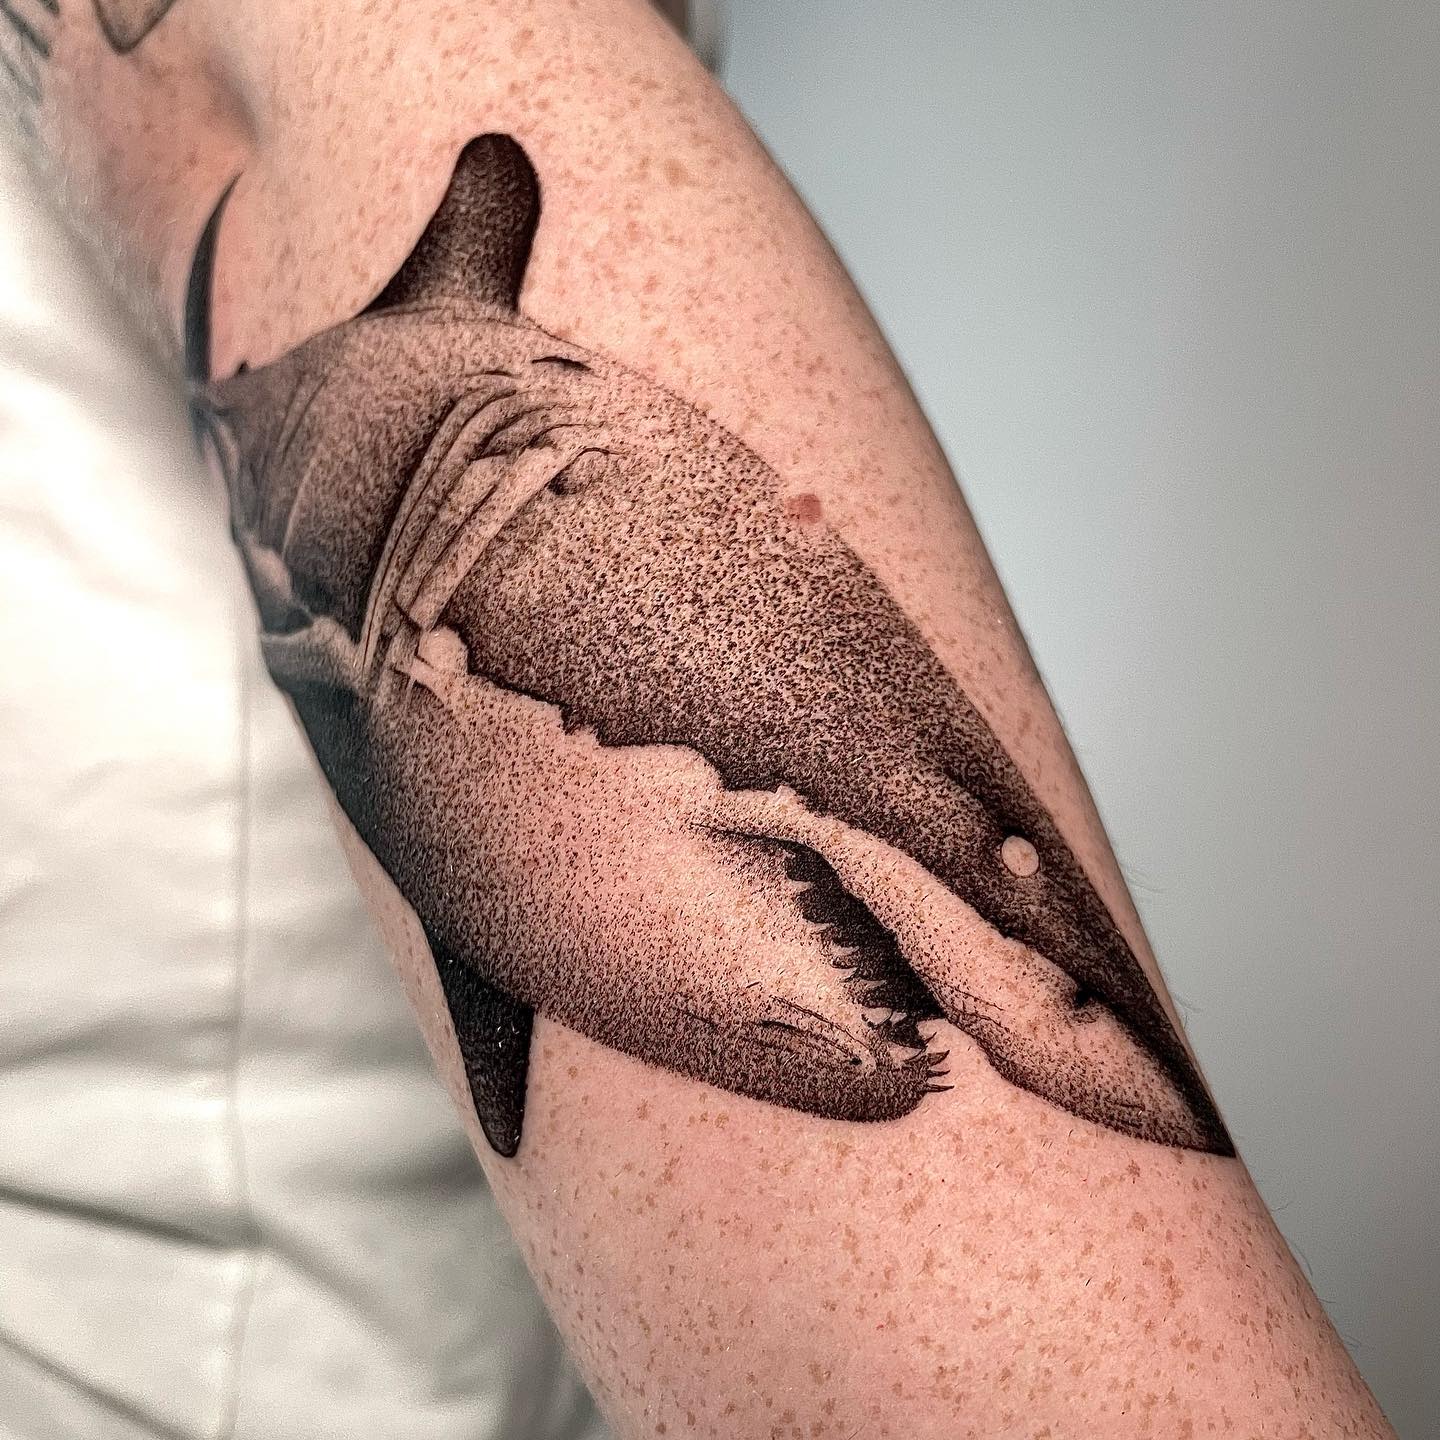 If you want to get this kind of a highly detailed dotwork tattoo, you better search for competent tattooist. The reason is it requires a talent to create a shark like this.